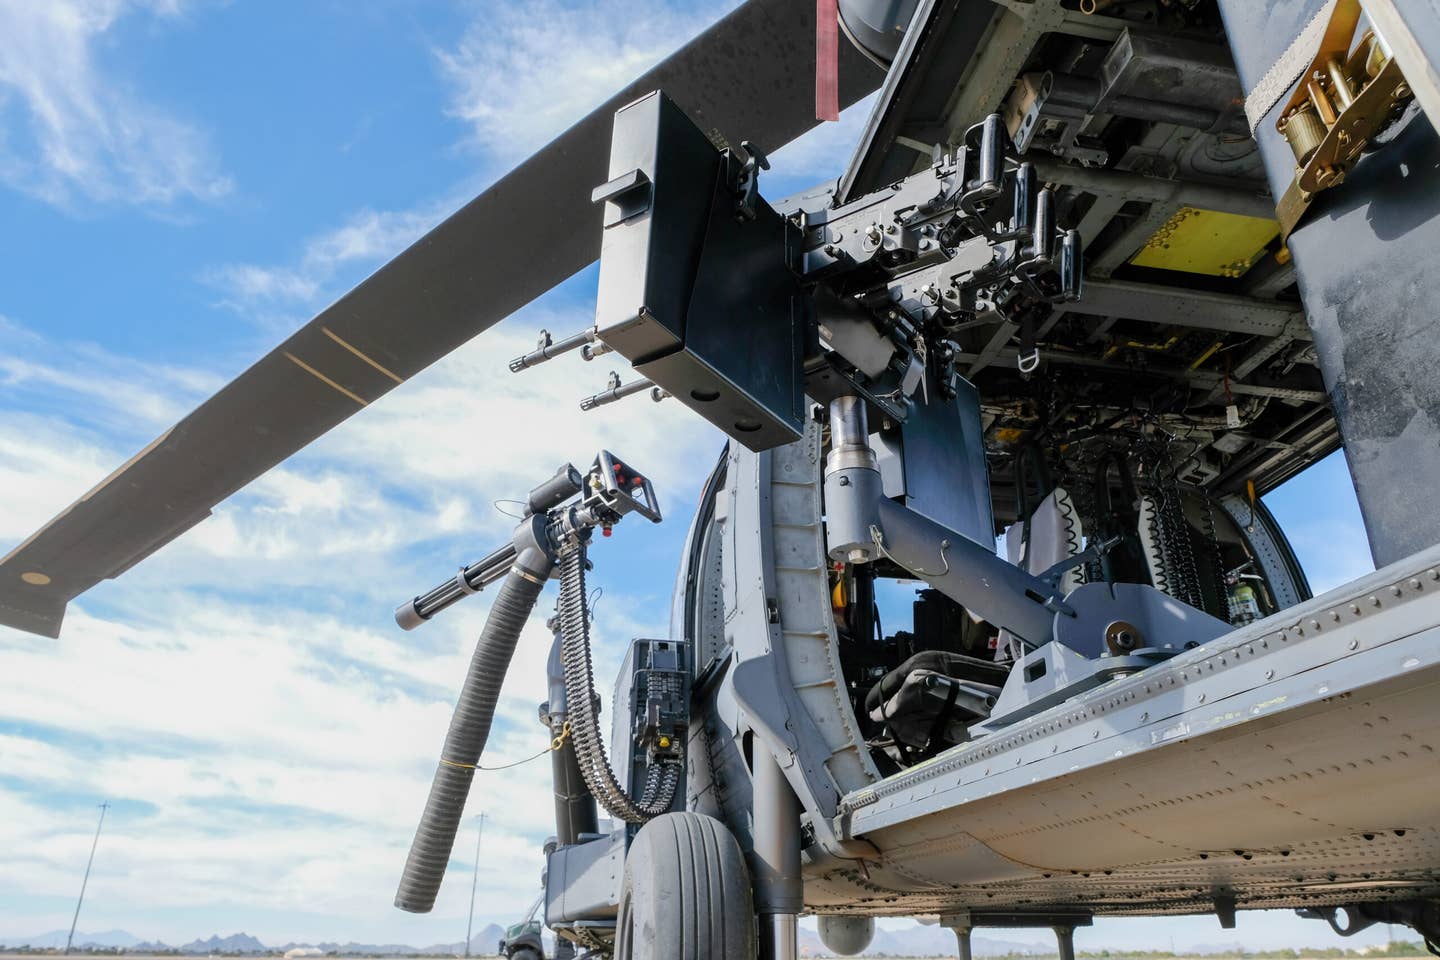 Another look at the dual M240 machine guns mounted to the doorway of the HH-60G. <em>Credit: U.S. Air Force photo by Andre Trinidad</em>